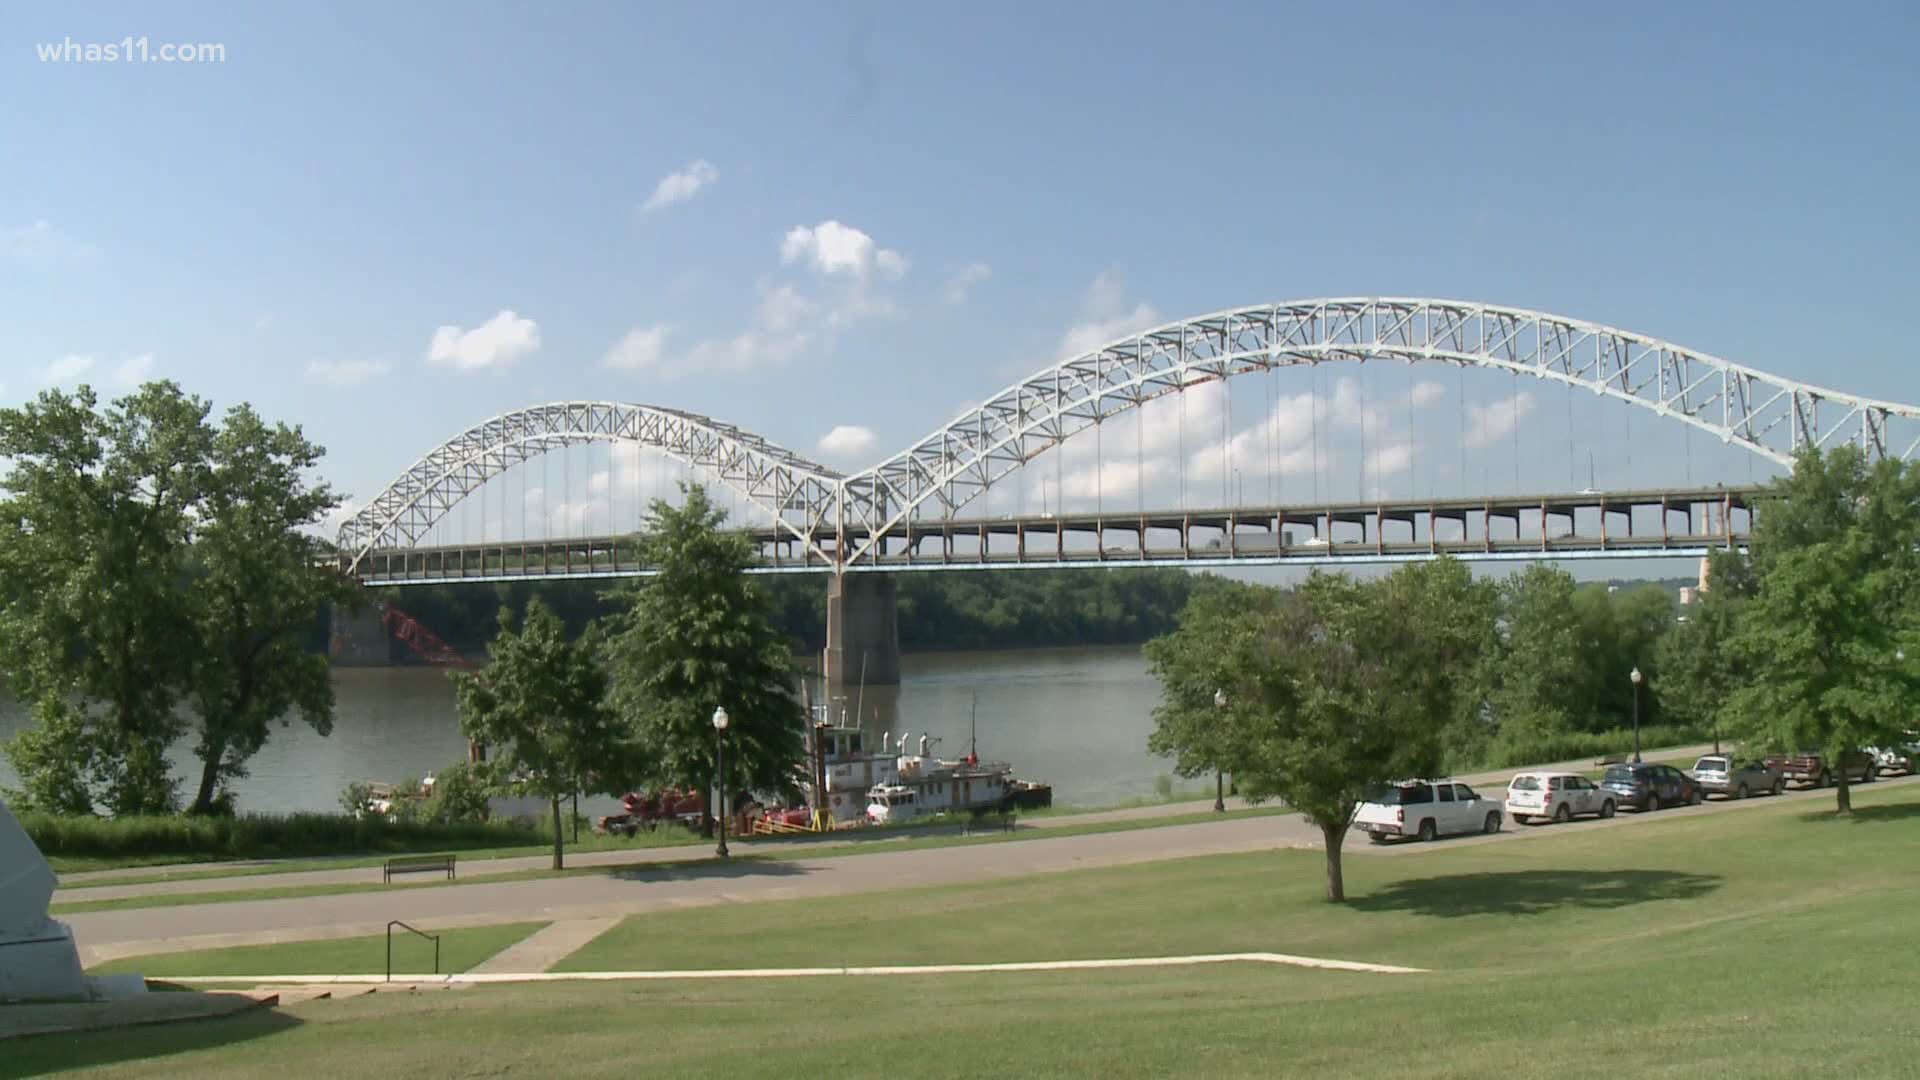 For months there have been questions around the looming Sherman Minton Bridge construction project scheduled for next year. Now, there are finally some answers.